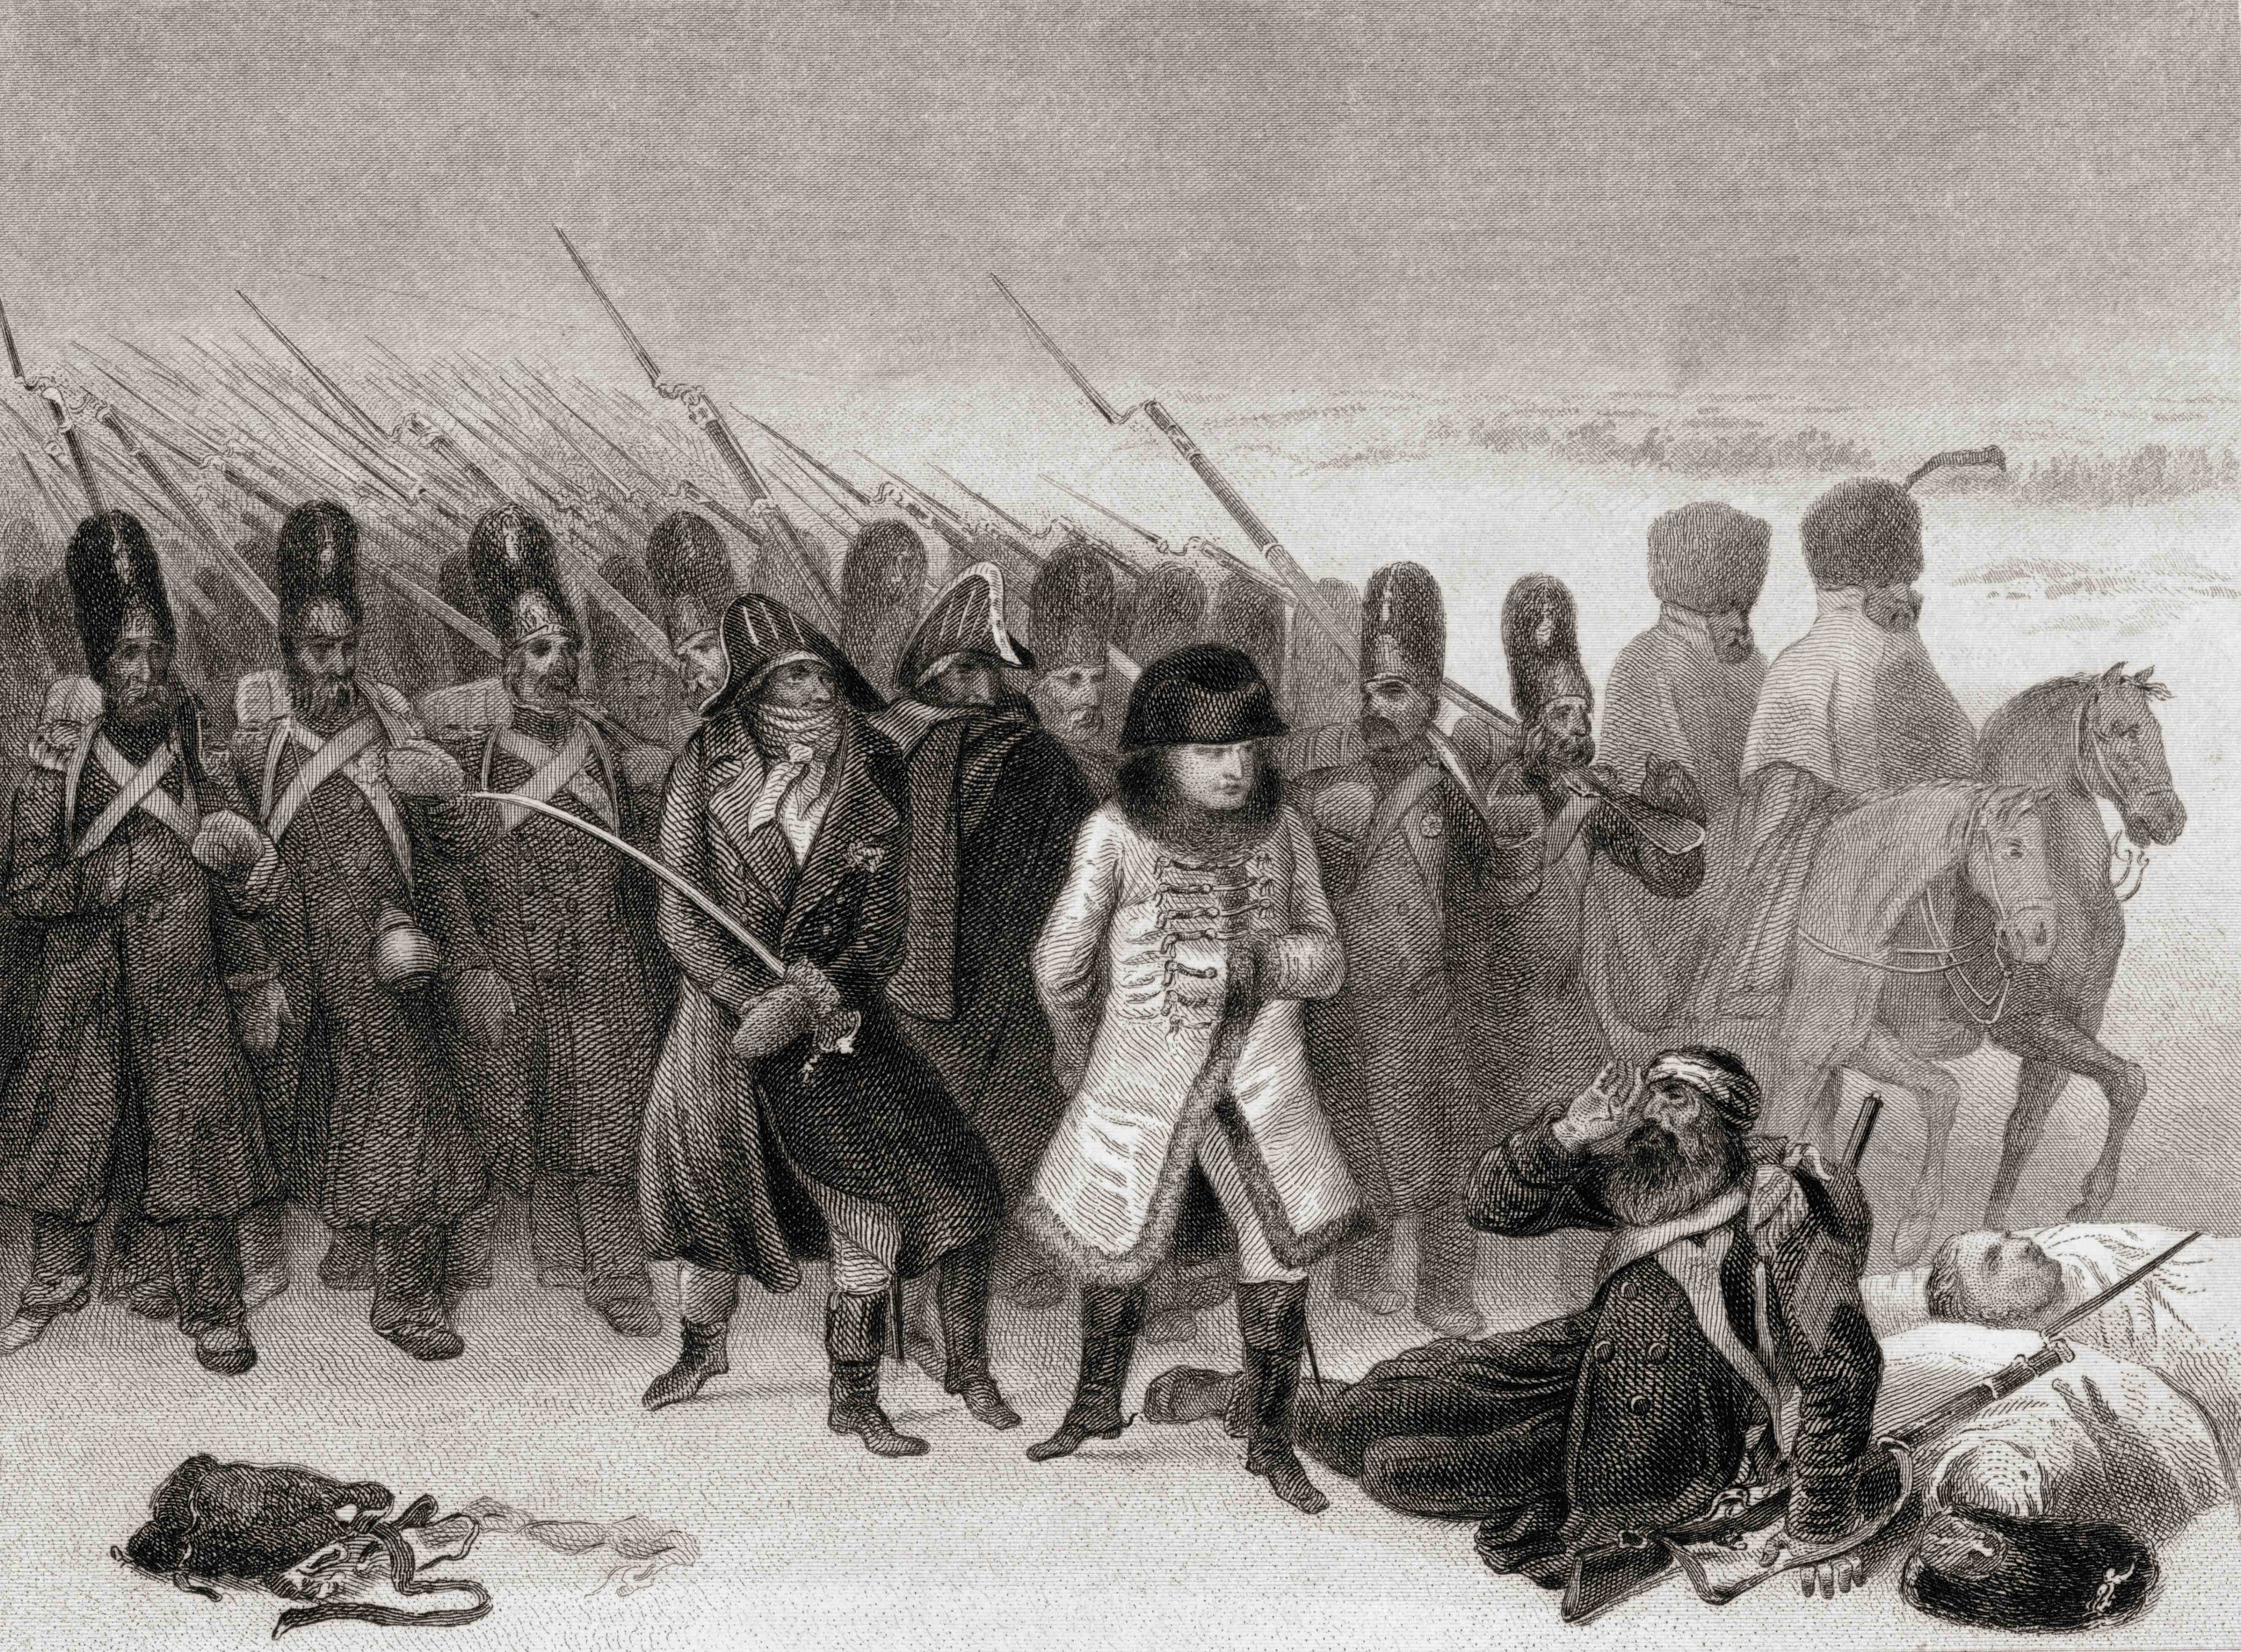 Napoleon¬¥s retreat from Russia, 1812. Napoleon Bonaparte, 1769-1821. Emperor of the French. Drawn by Raffet, engraved by J. Smith.